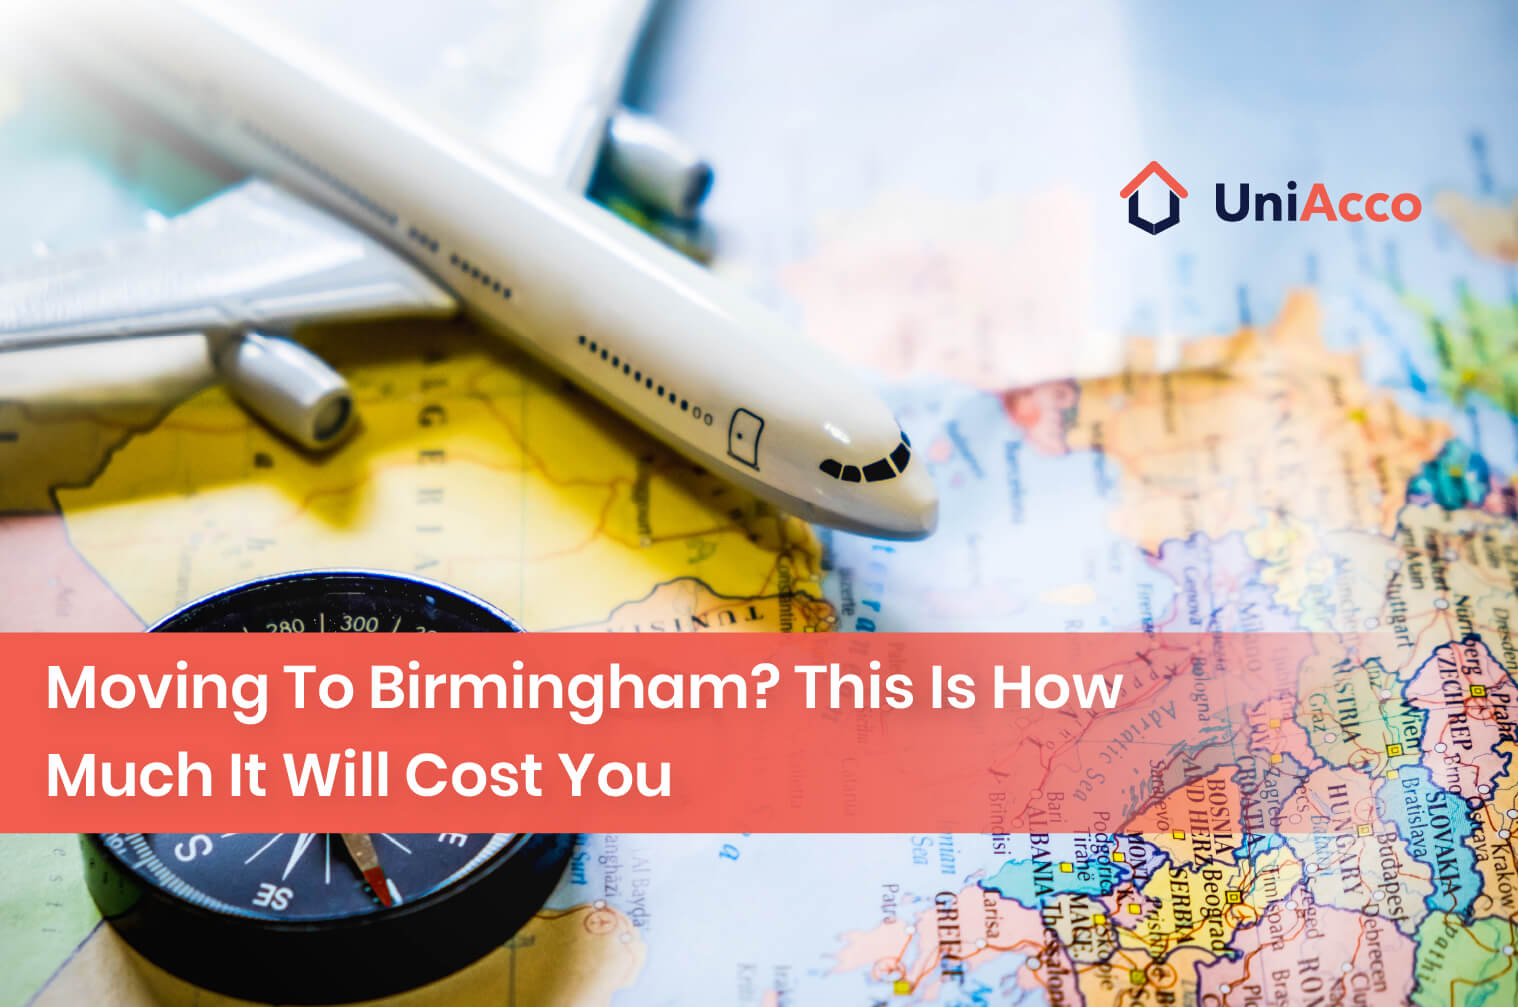 In this article we let you know the cost Birmingham city will have on your expenses if you plan to study there,